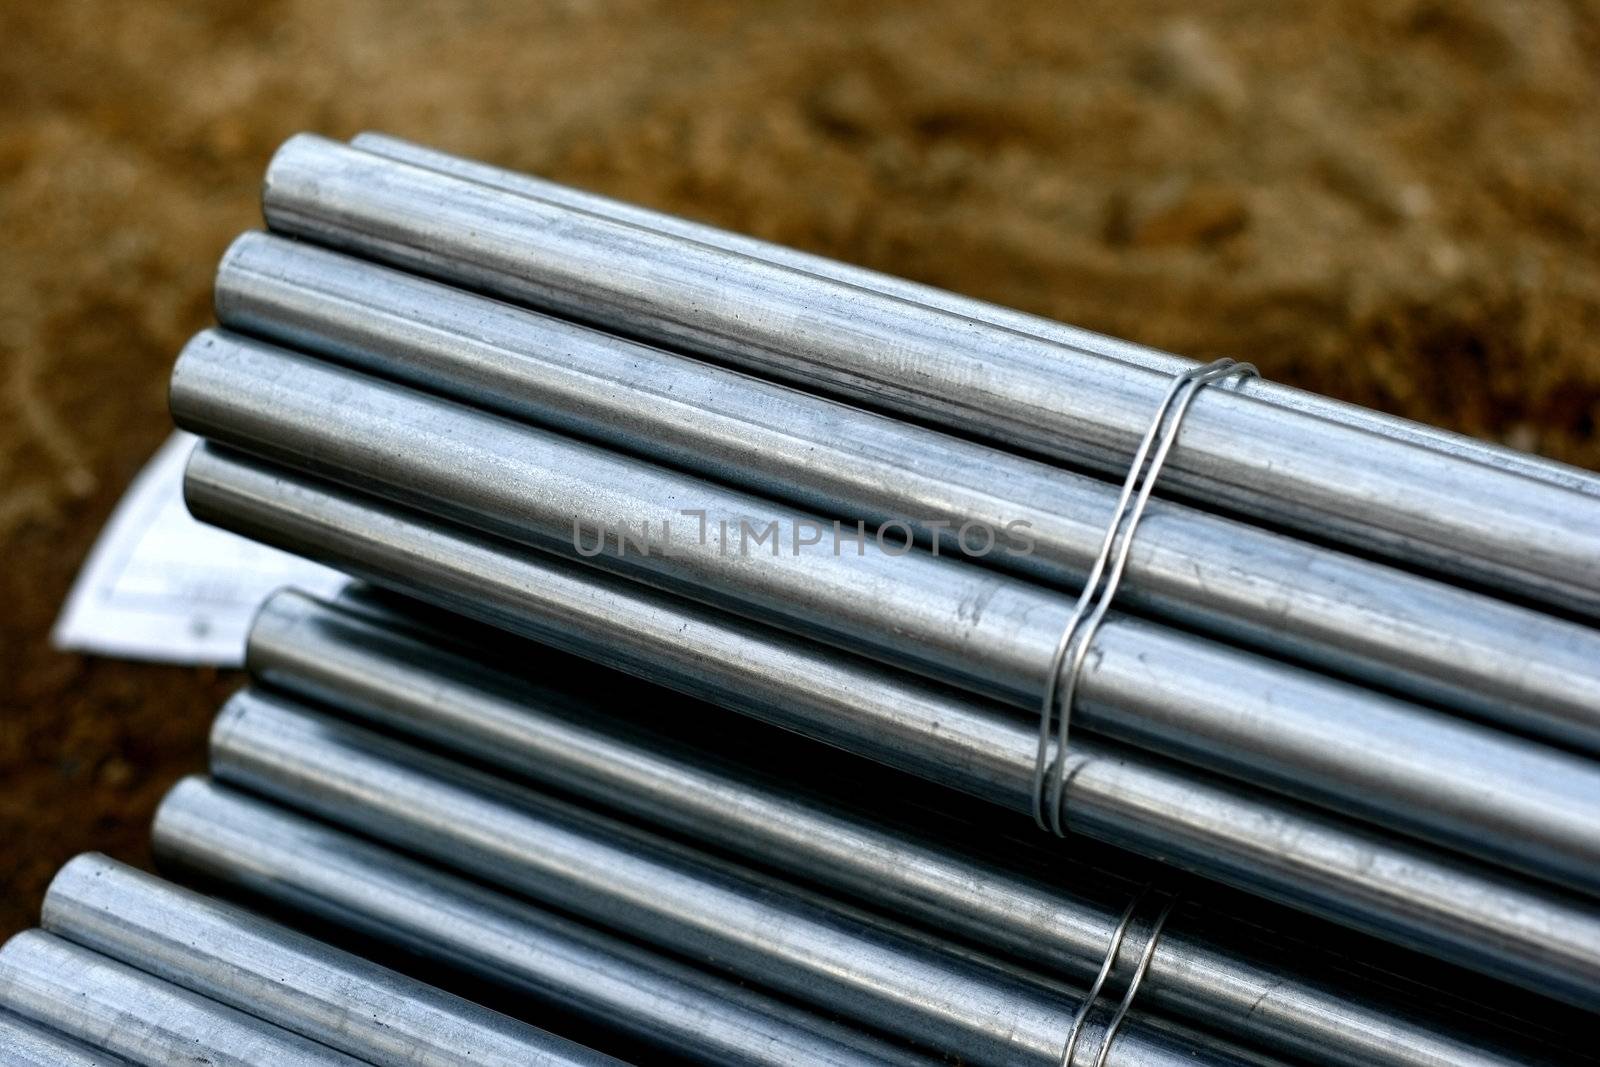 Piping Tubing material used in the construction